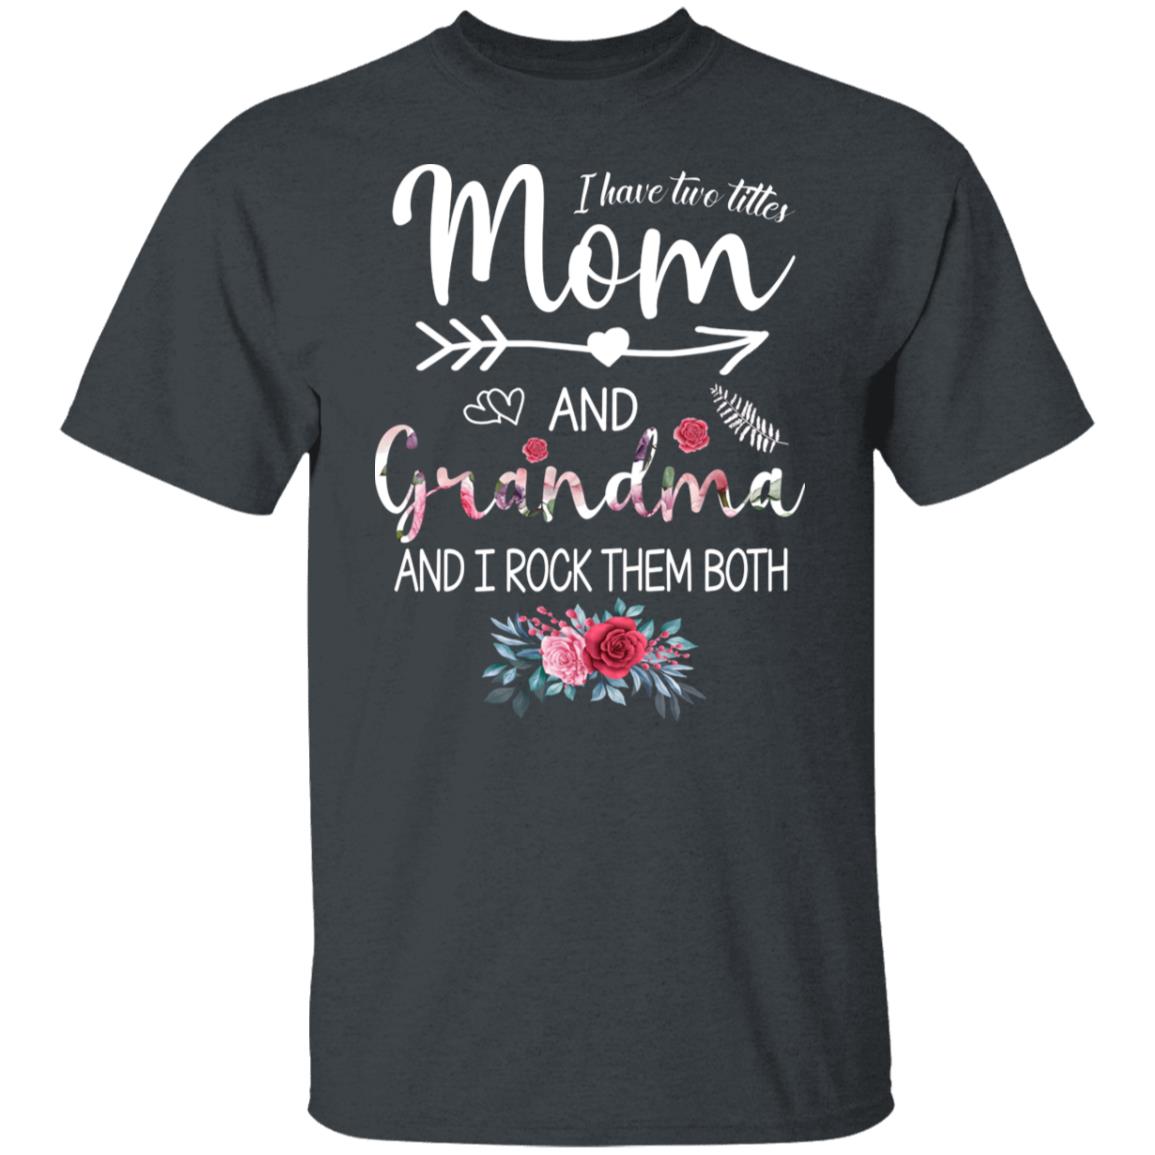 I Have Two Tittles Mom and Grandma and I Rock Them Both Shirt